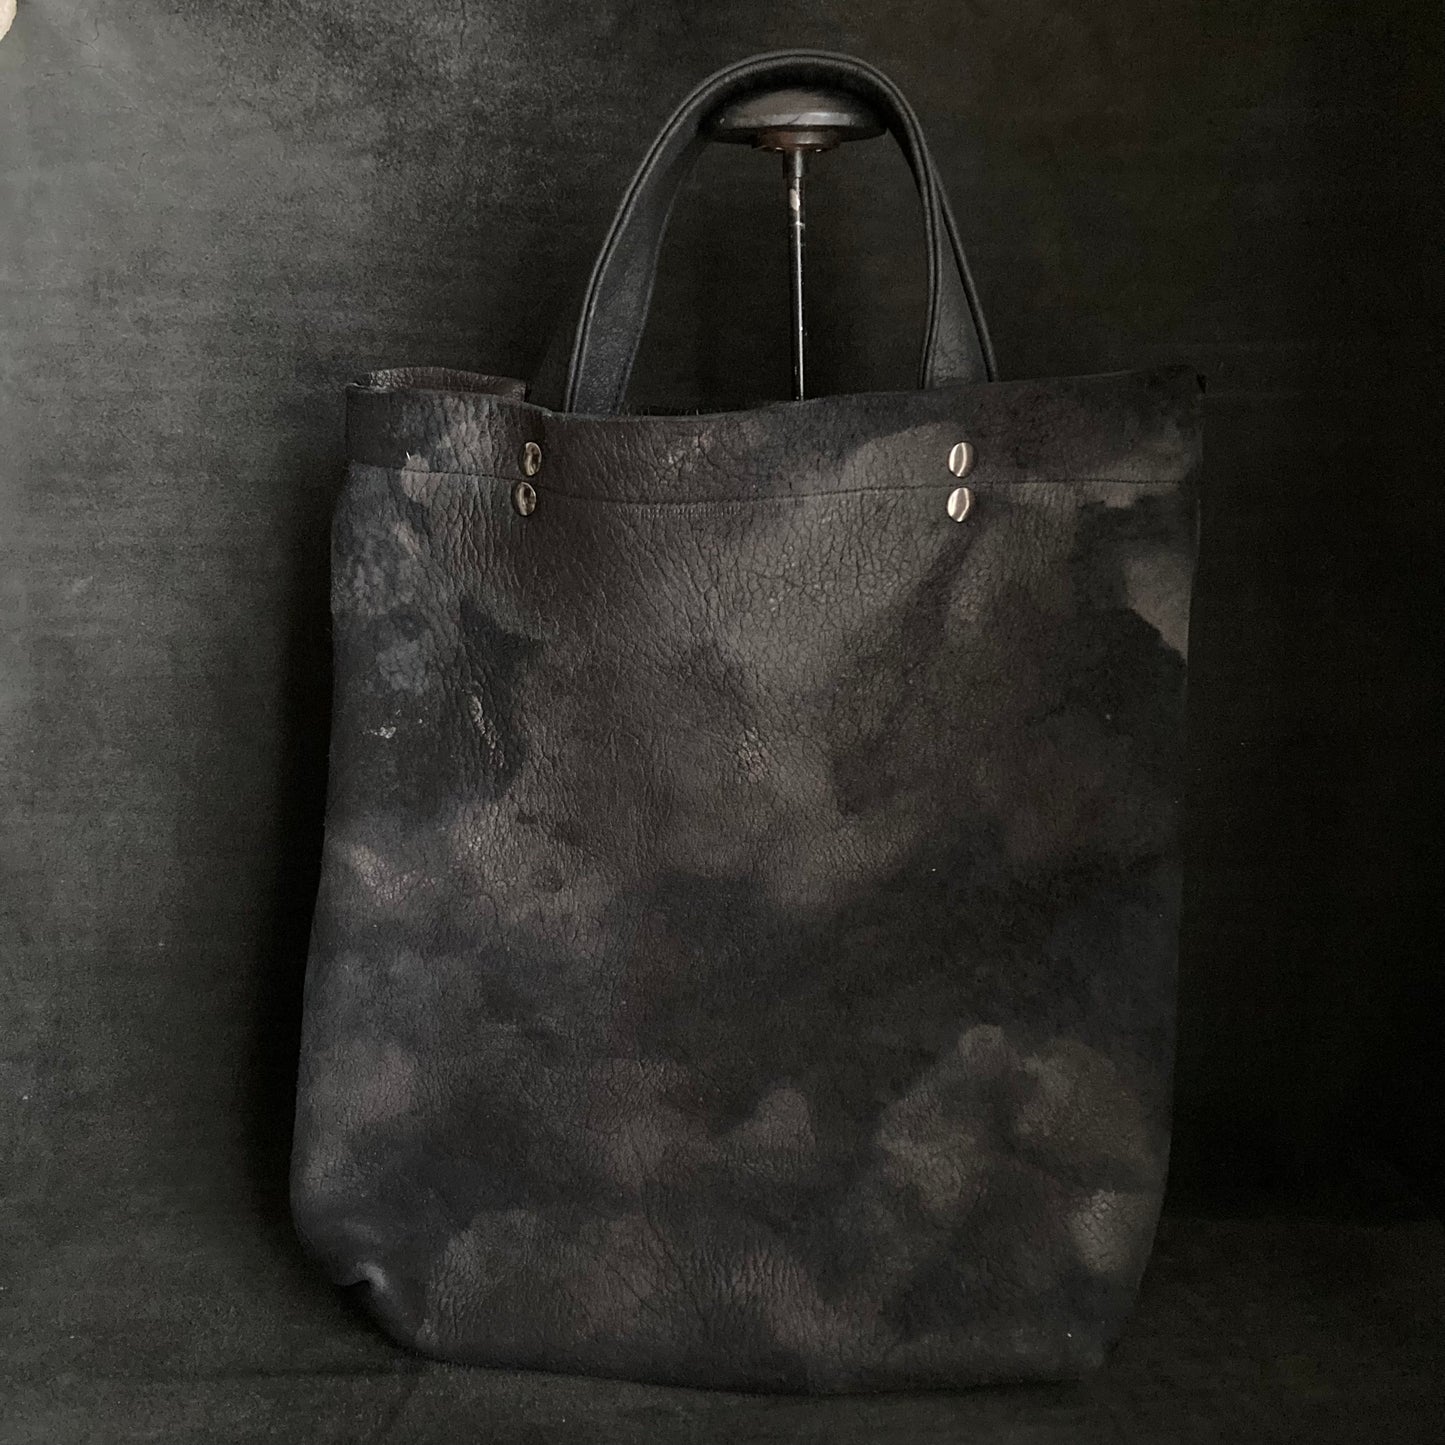 Bleached black leather tote bag